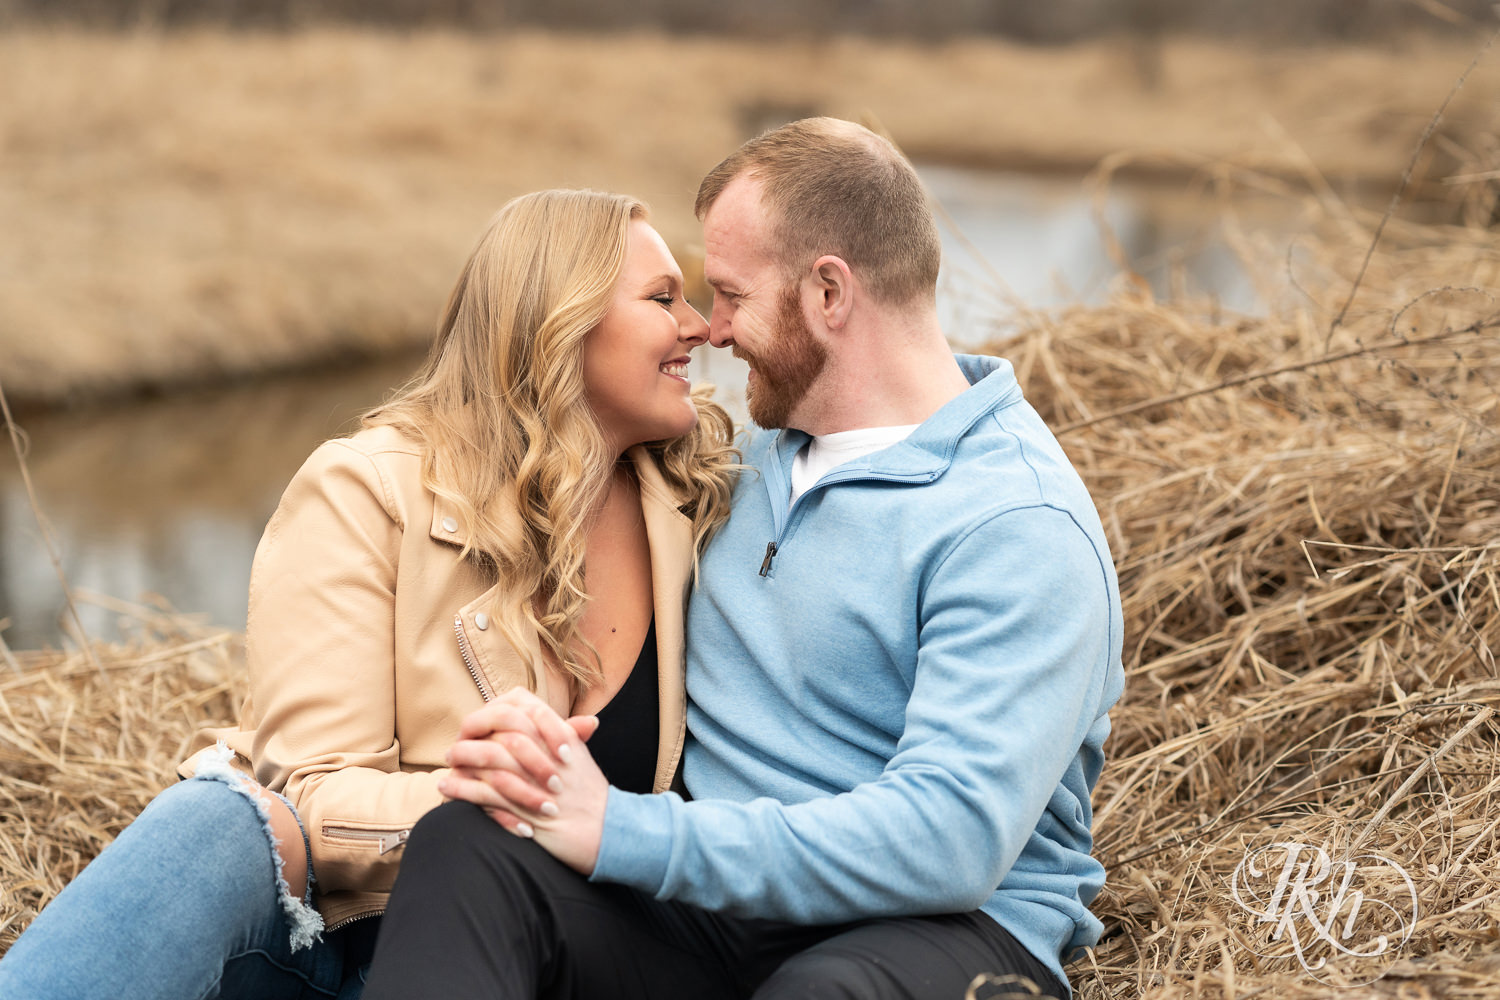 Man in blue shirt and woman in jeans smile during engagement photography at Rice Creek Regional Trail in Shoreview, Minnesota.